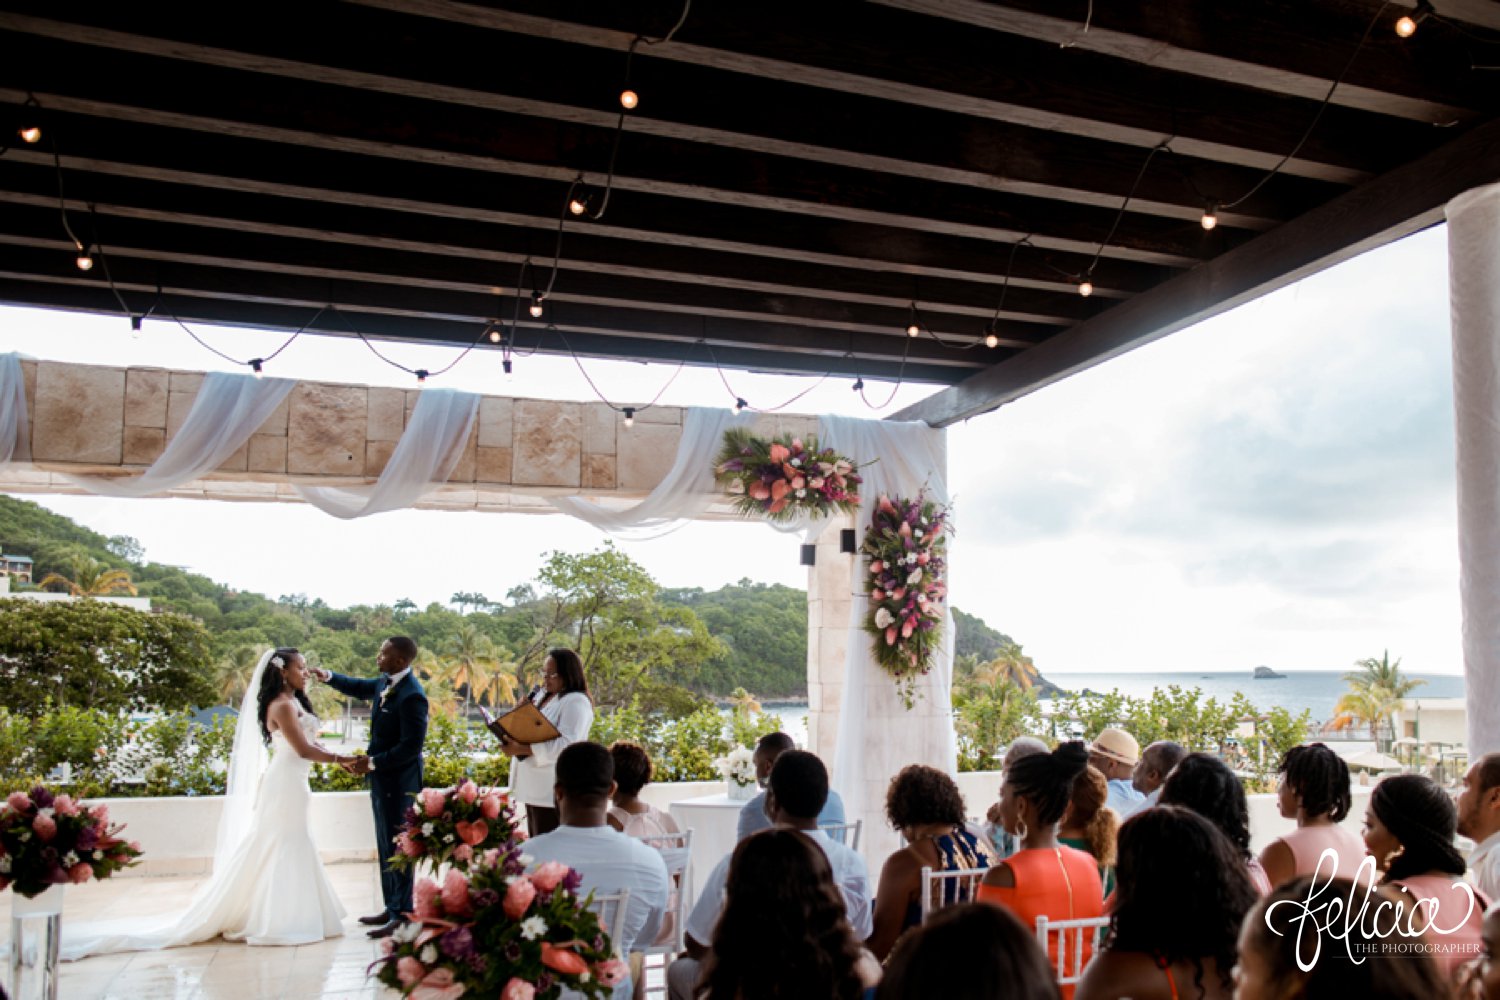   images by feliciathephotographer.com | destination wedding photographer | st lucia | l&s travel | the Royalton | ceremony | exchanging vows | topical | Caribbean | wooden cabana | stone walkway | pink flowers | 